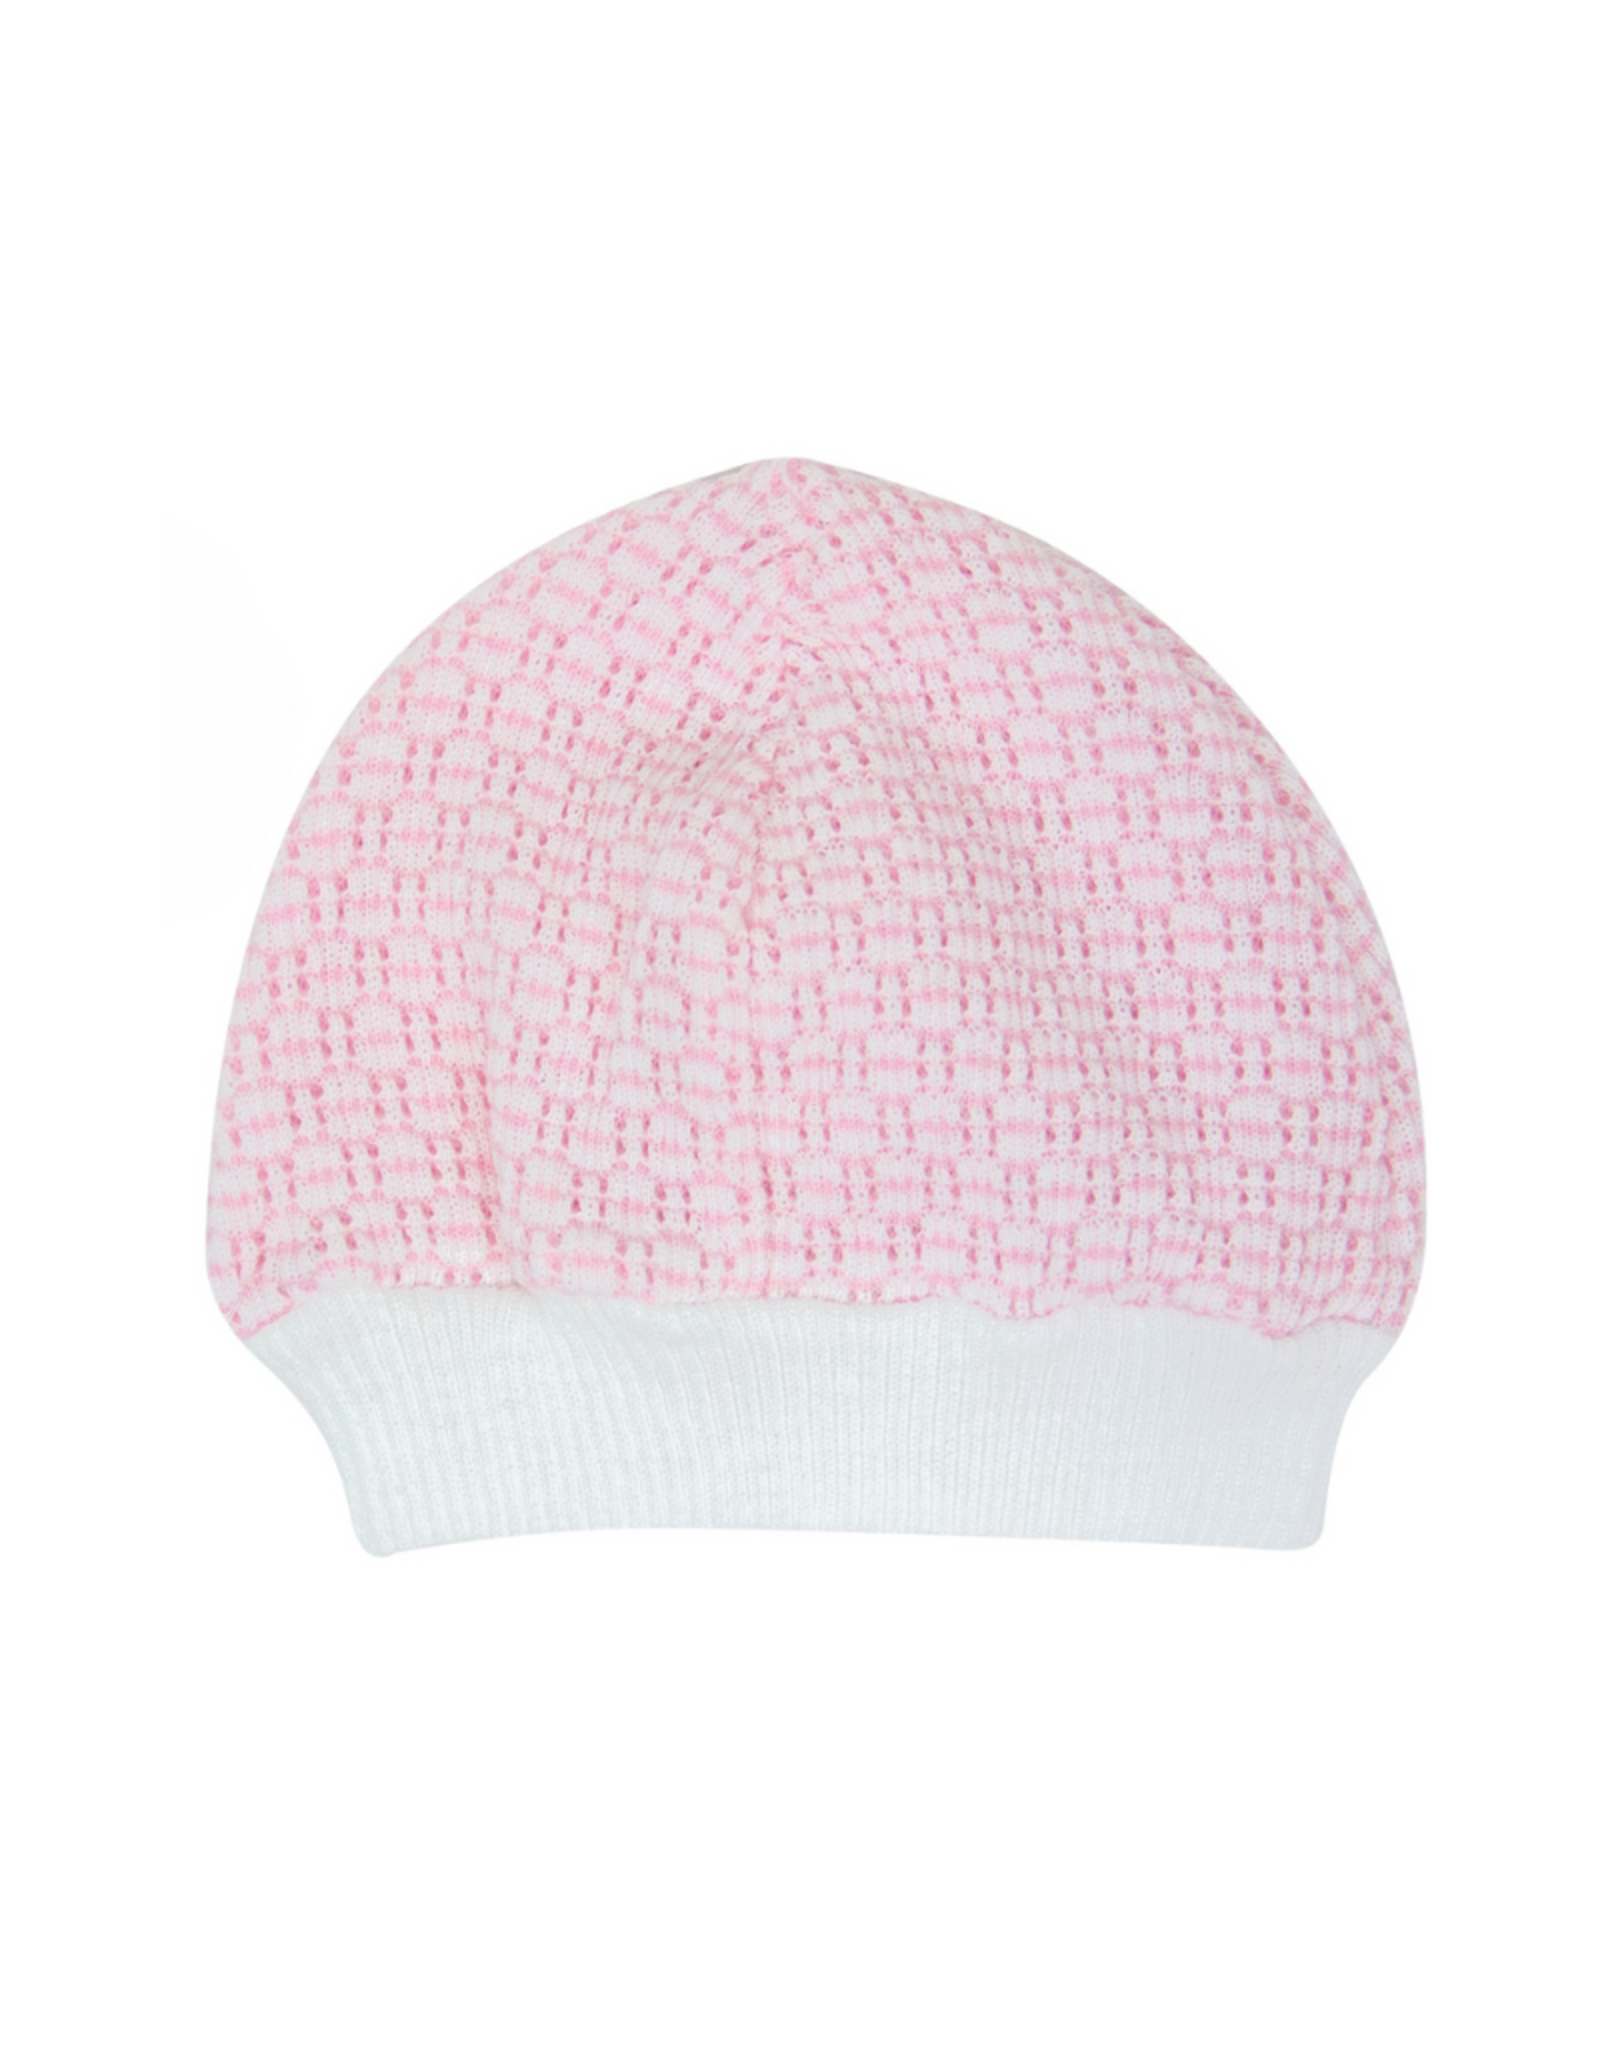 Paty Paty Solid Beanie Pink